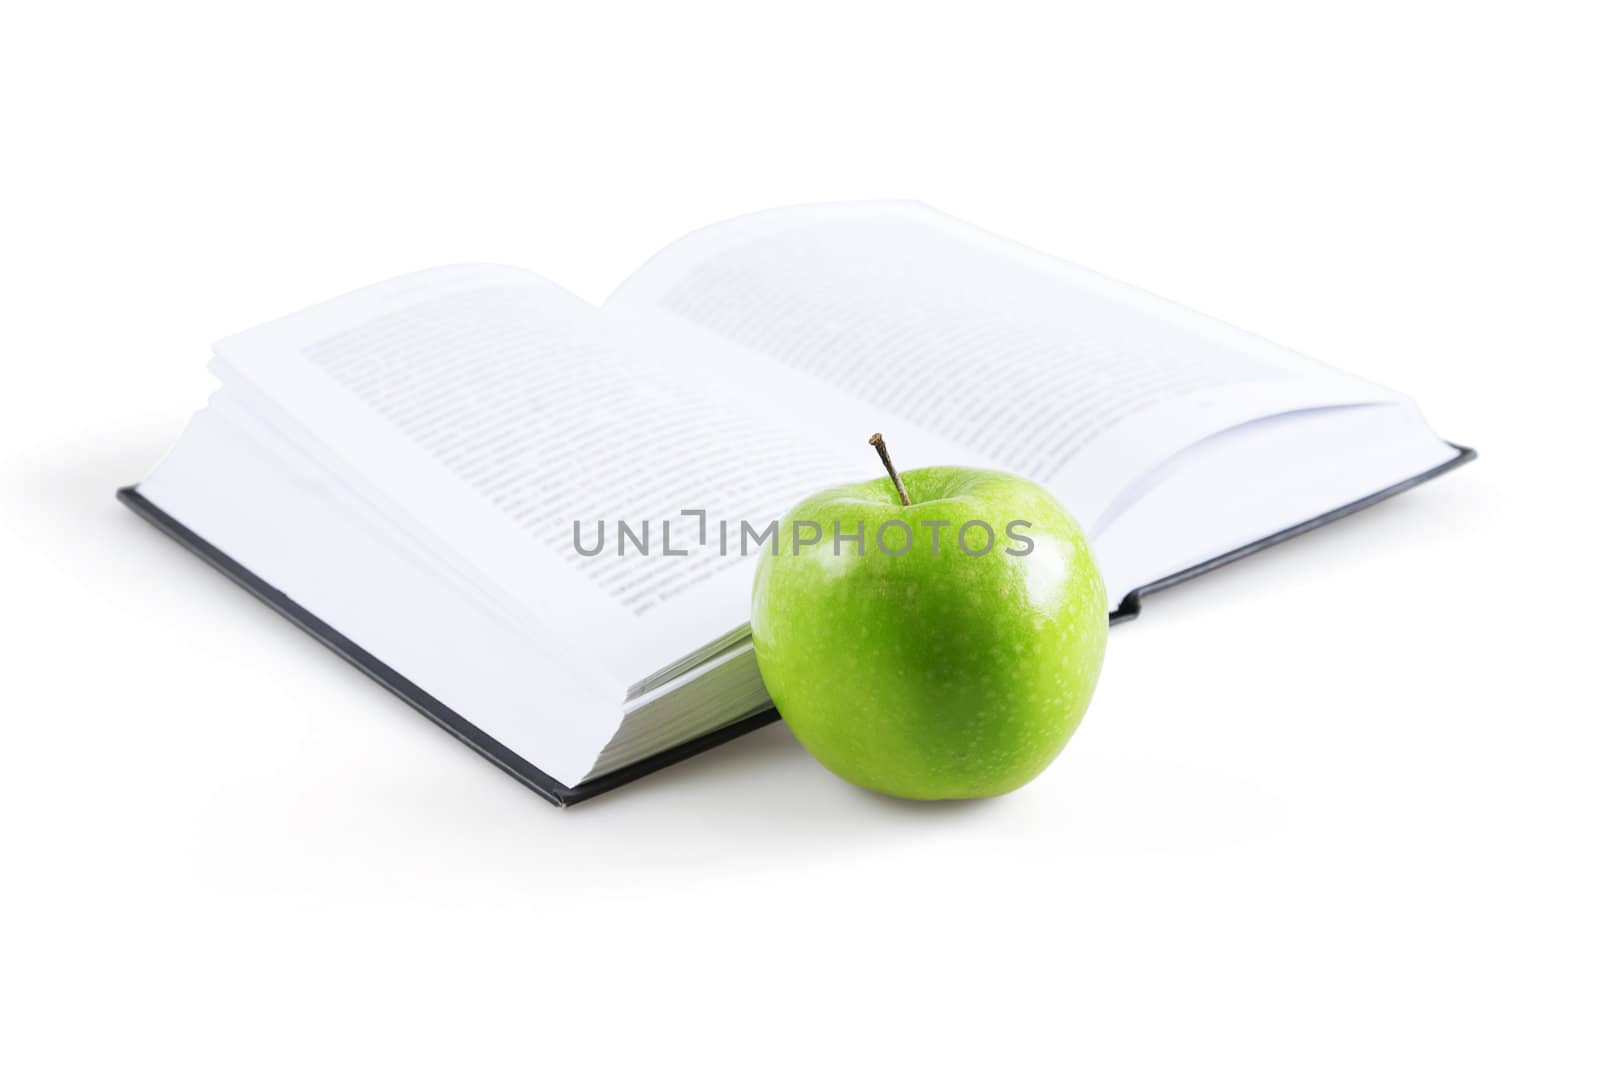 art book and ripe green apple by Serp